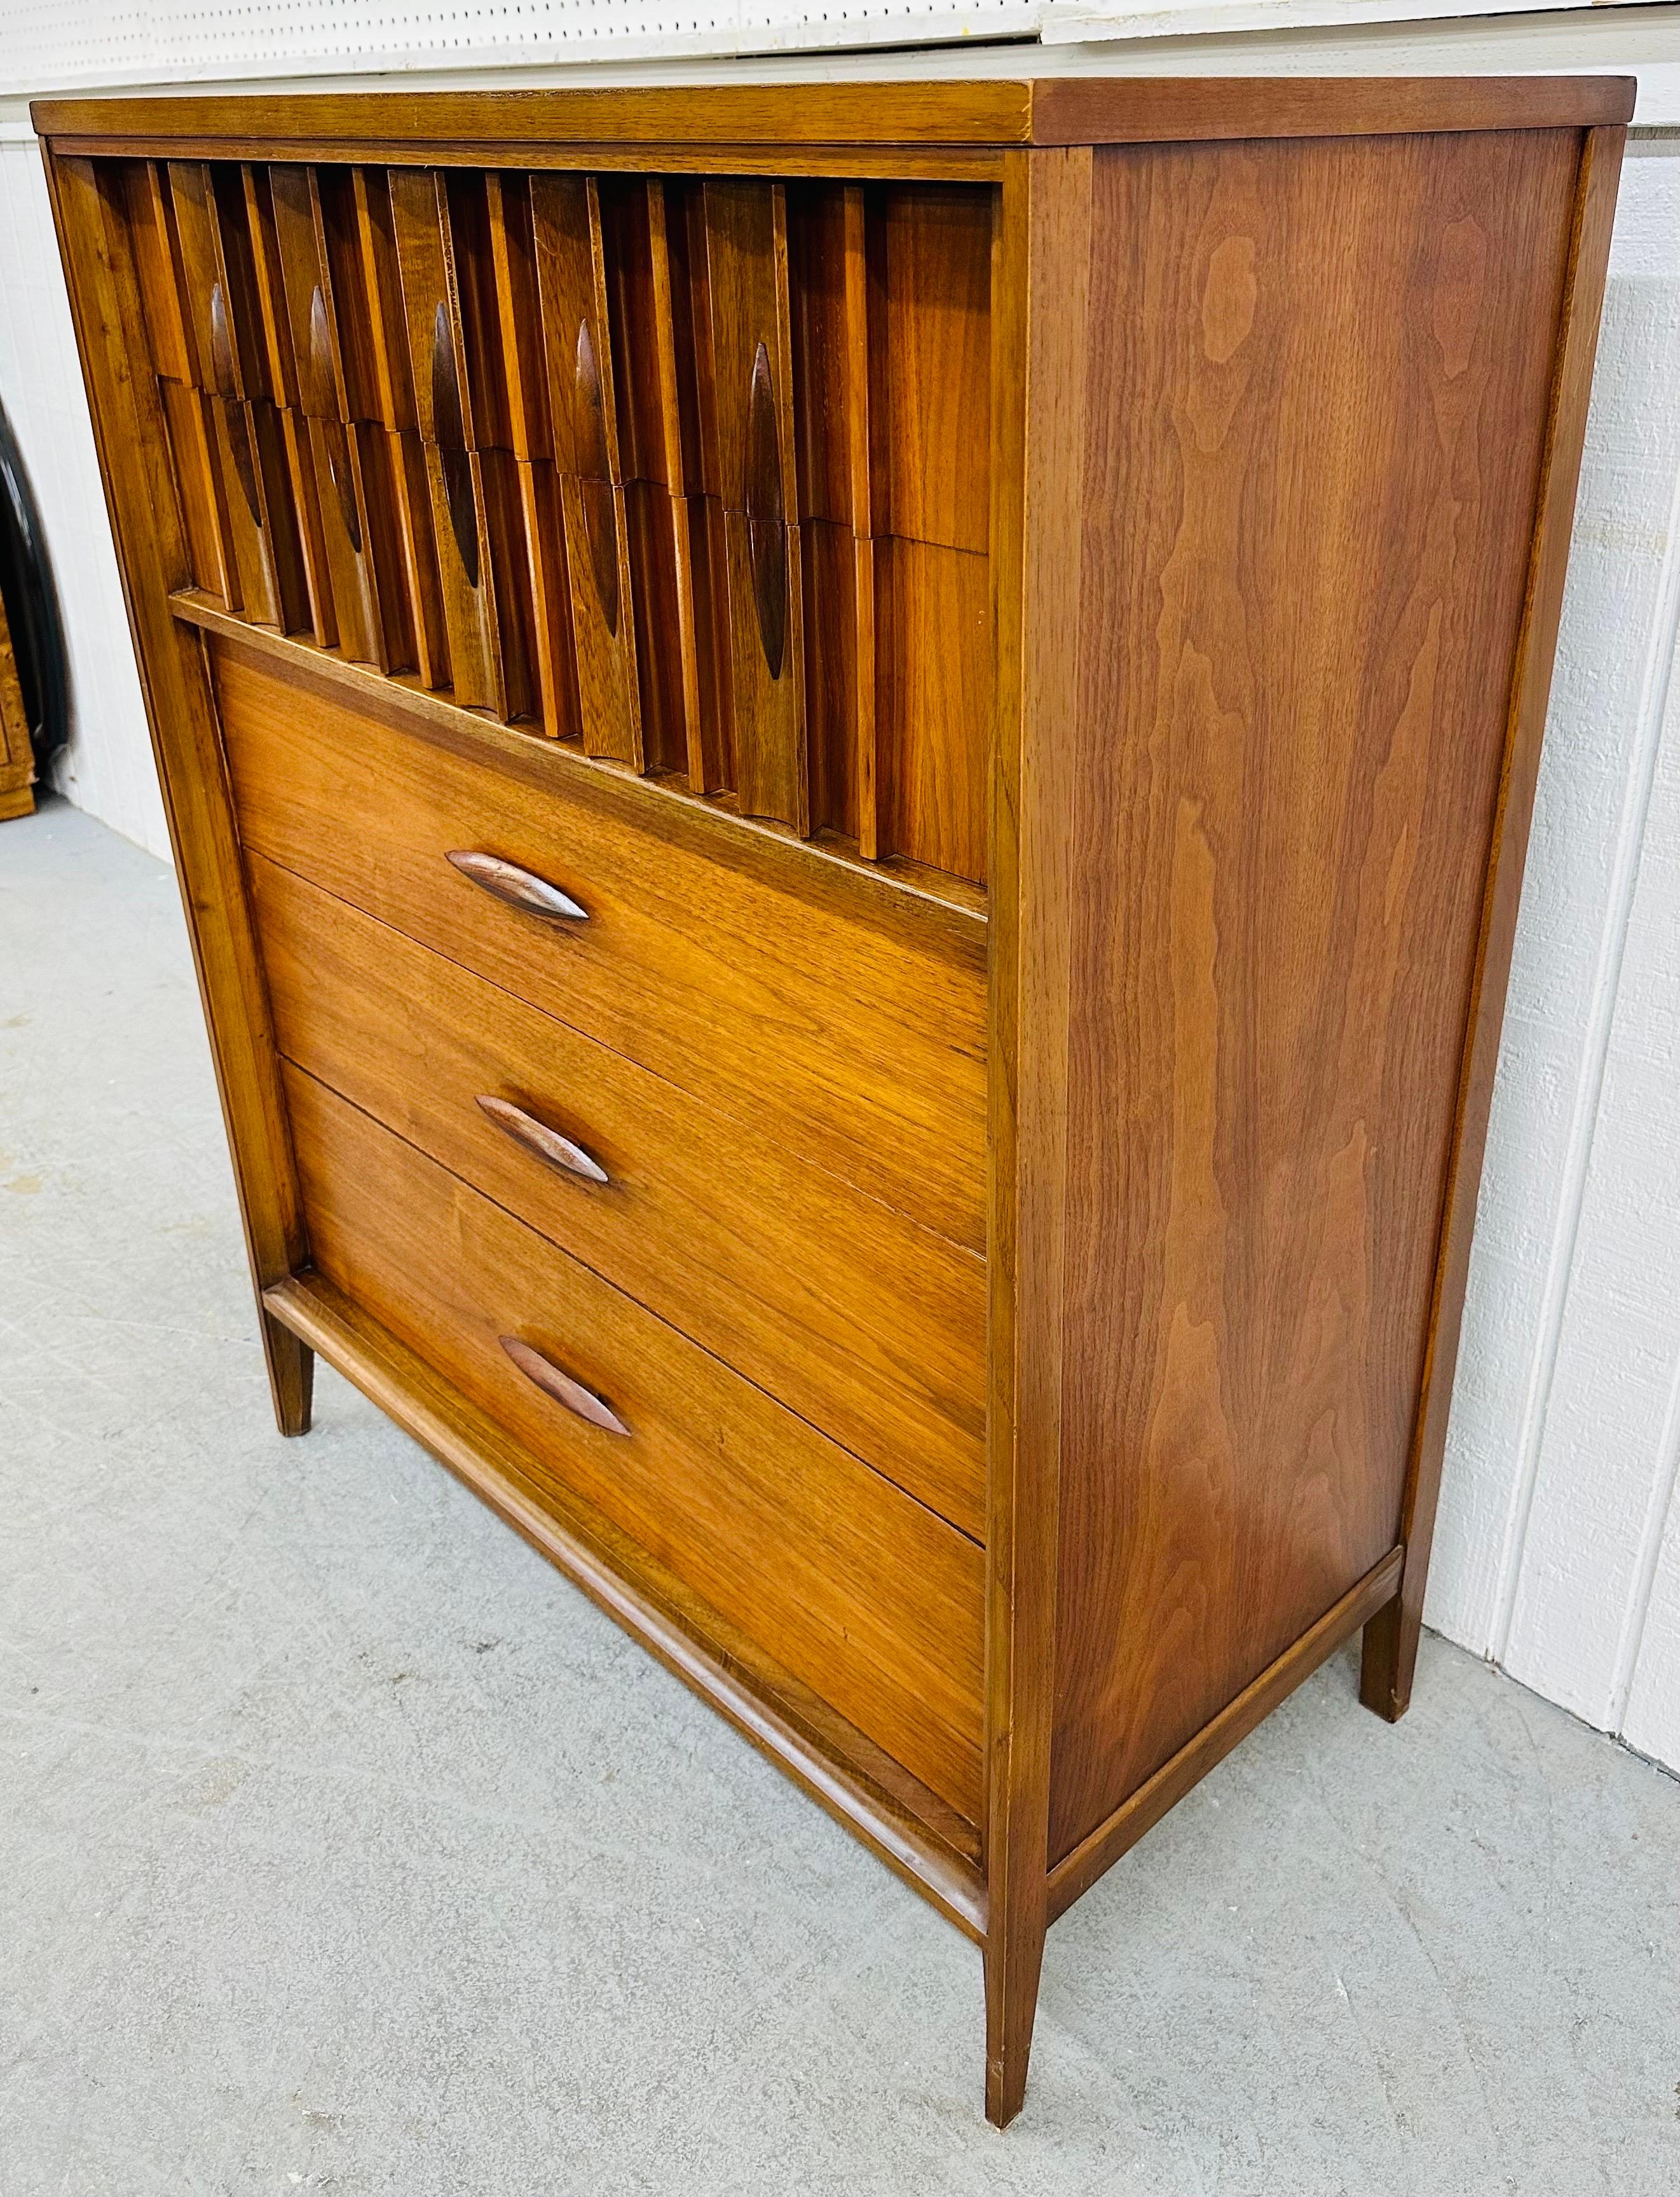 This listing is for a Mid-Century Modern Thomasville Walnut High Chest. Featuring a straight line design, five drawers for storage, sculpted rosewood pulls, and a beautiful walnut finish. This is an exceptional combination of quality and design by